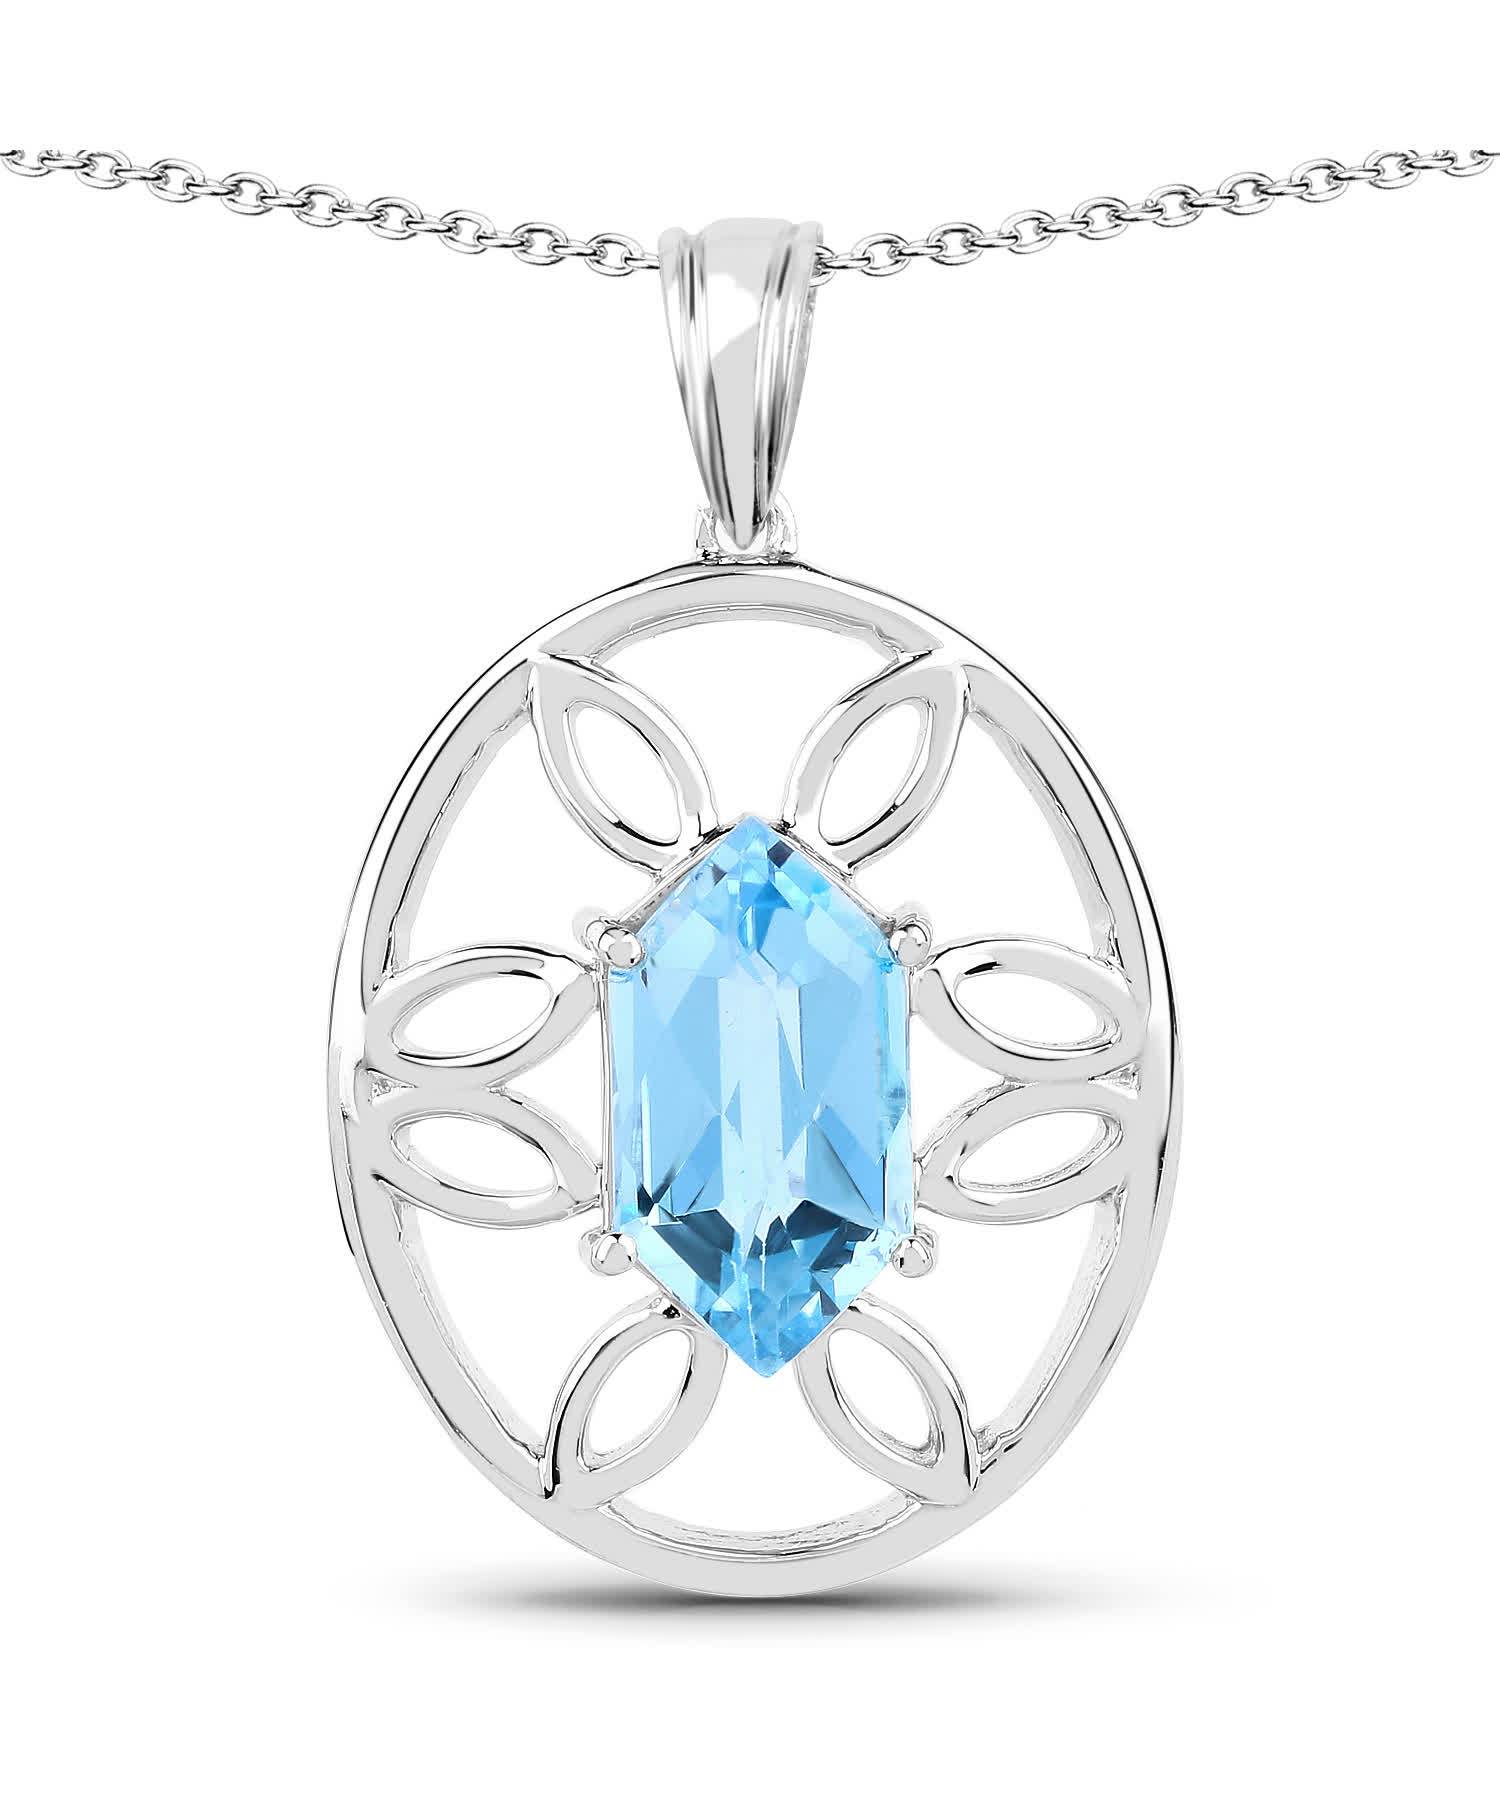 6.17ctw Natural Swiss Blue Topaz Rhodium Plated 925 Sterling Silver Oval Pendant With Chain View 1